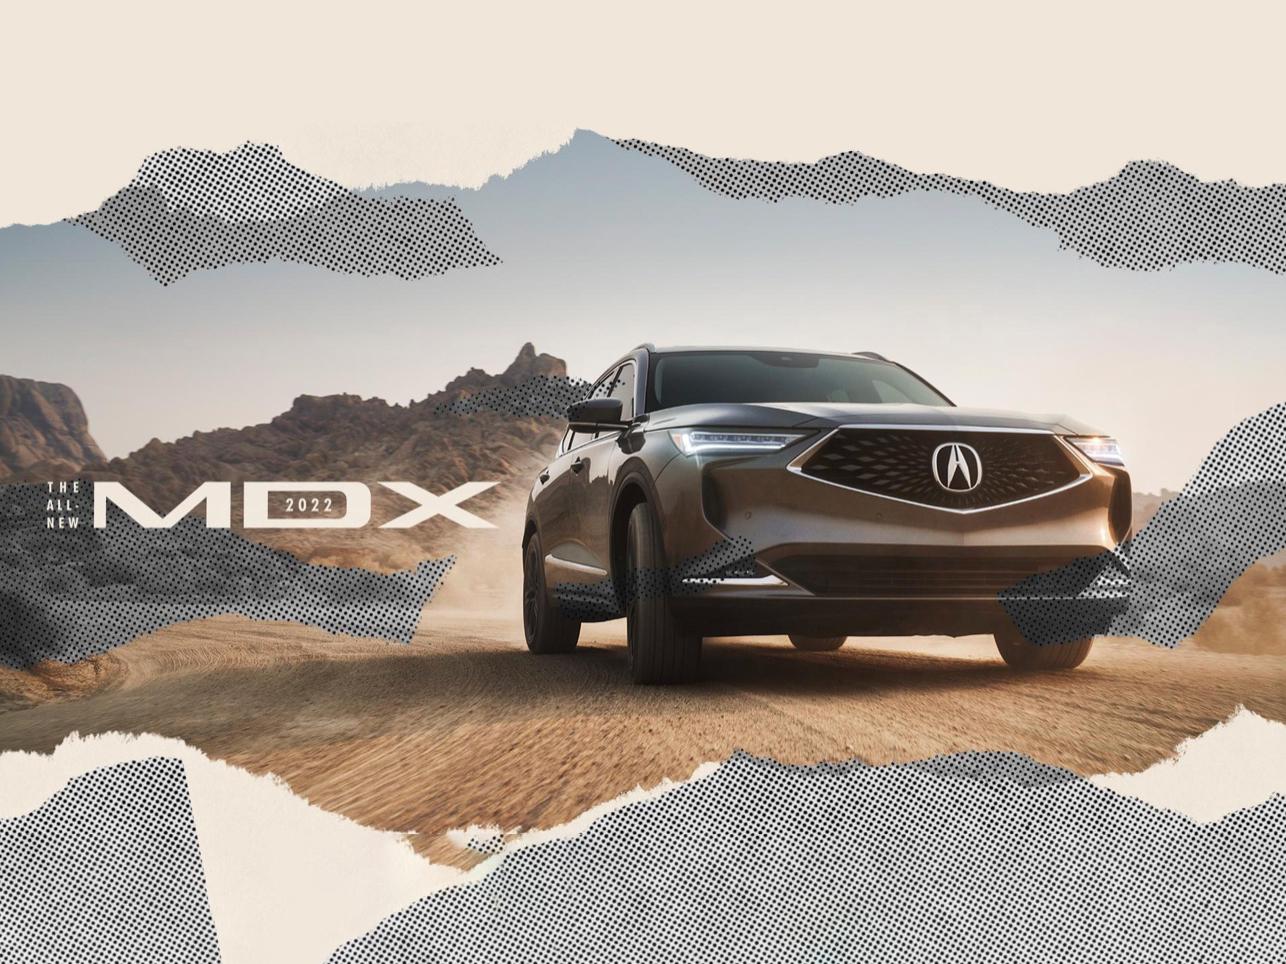 The Acura MDX is on sale now.